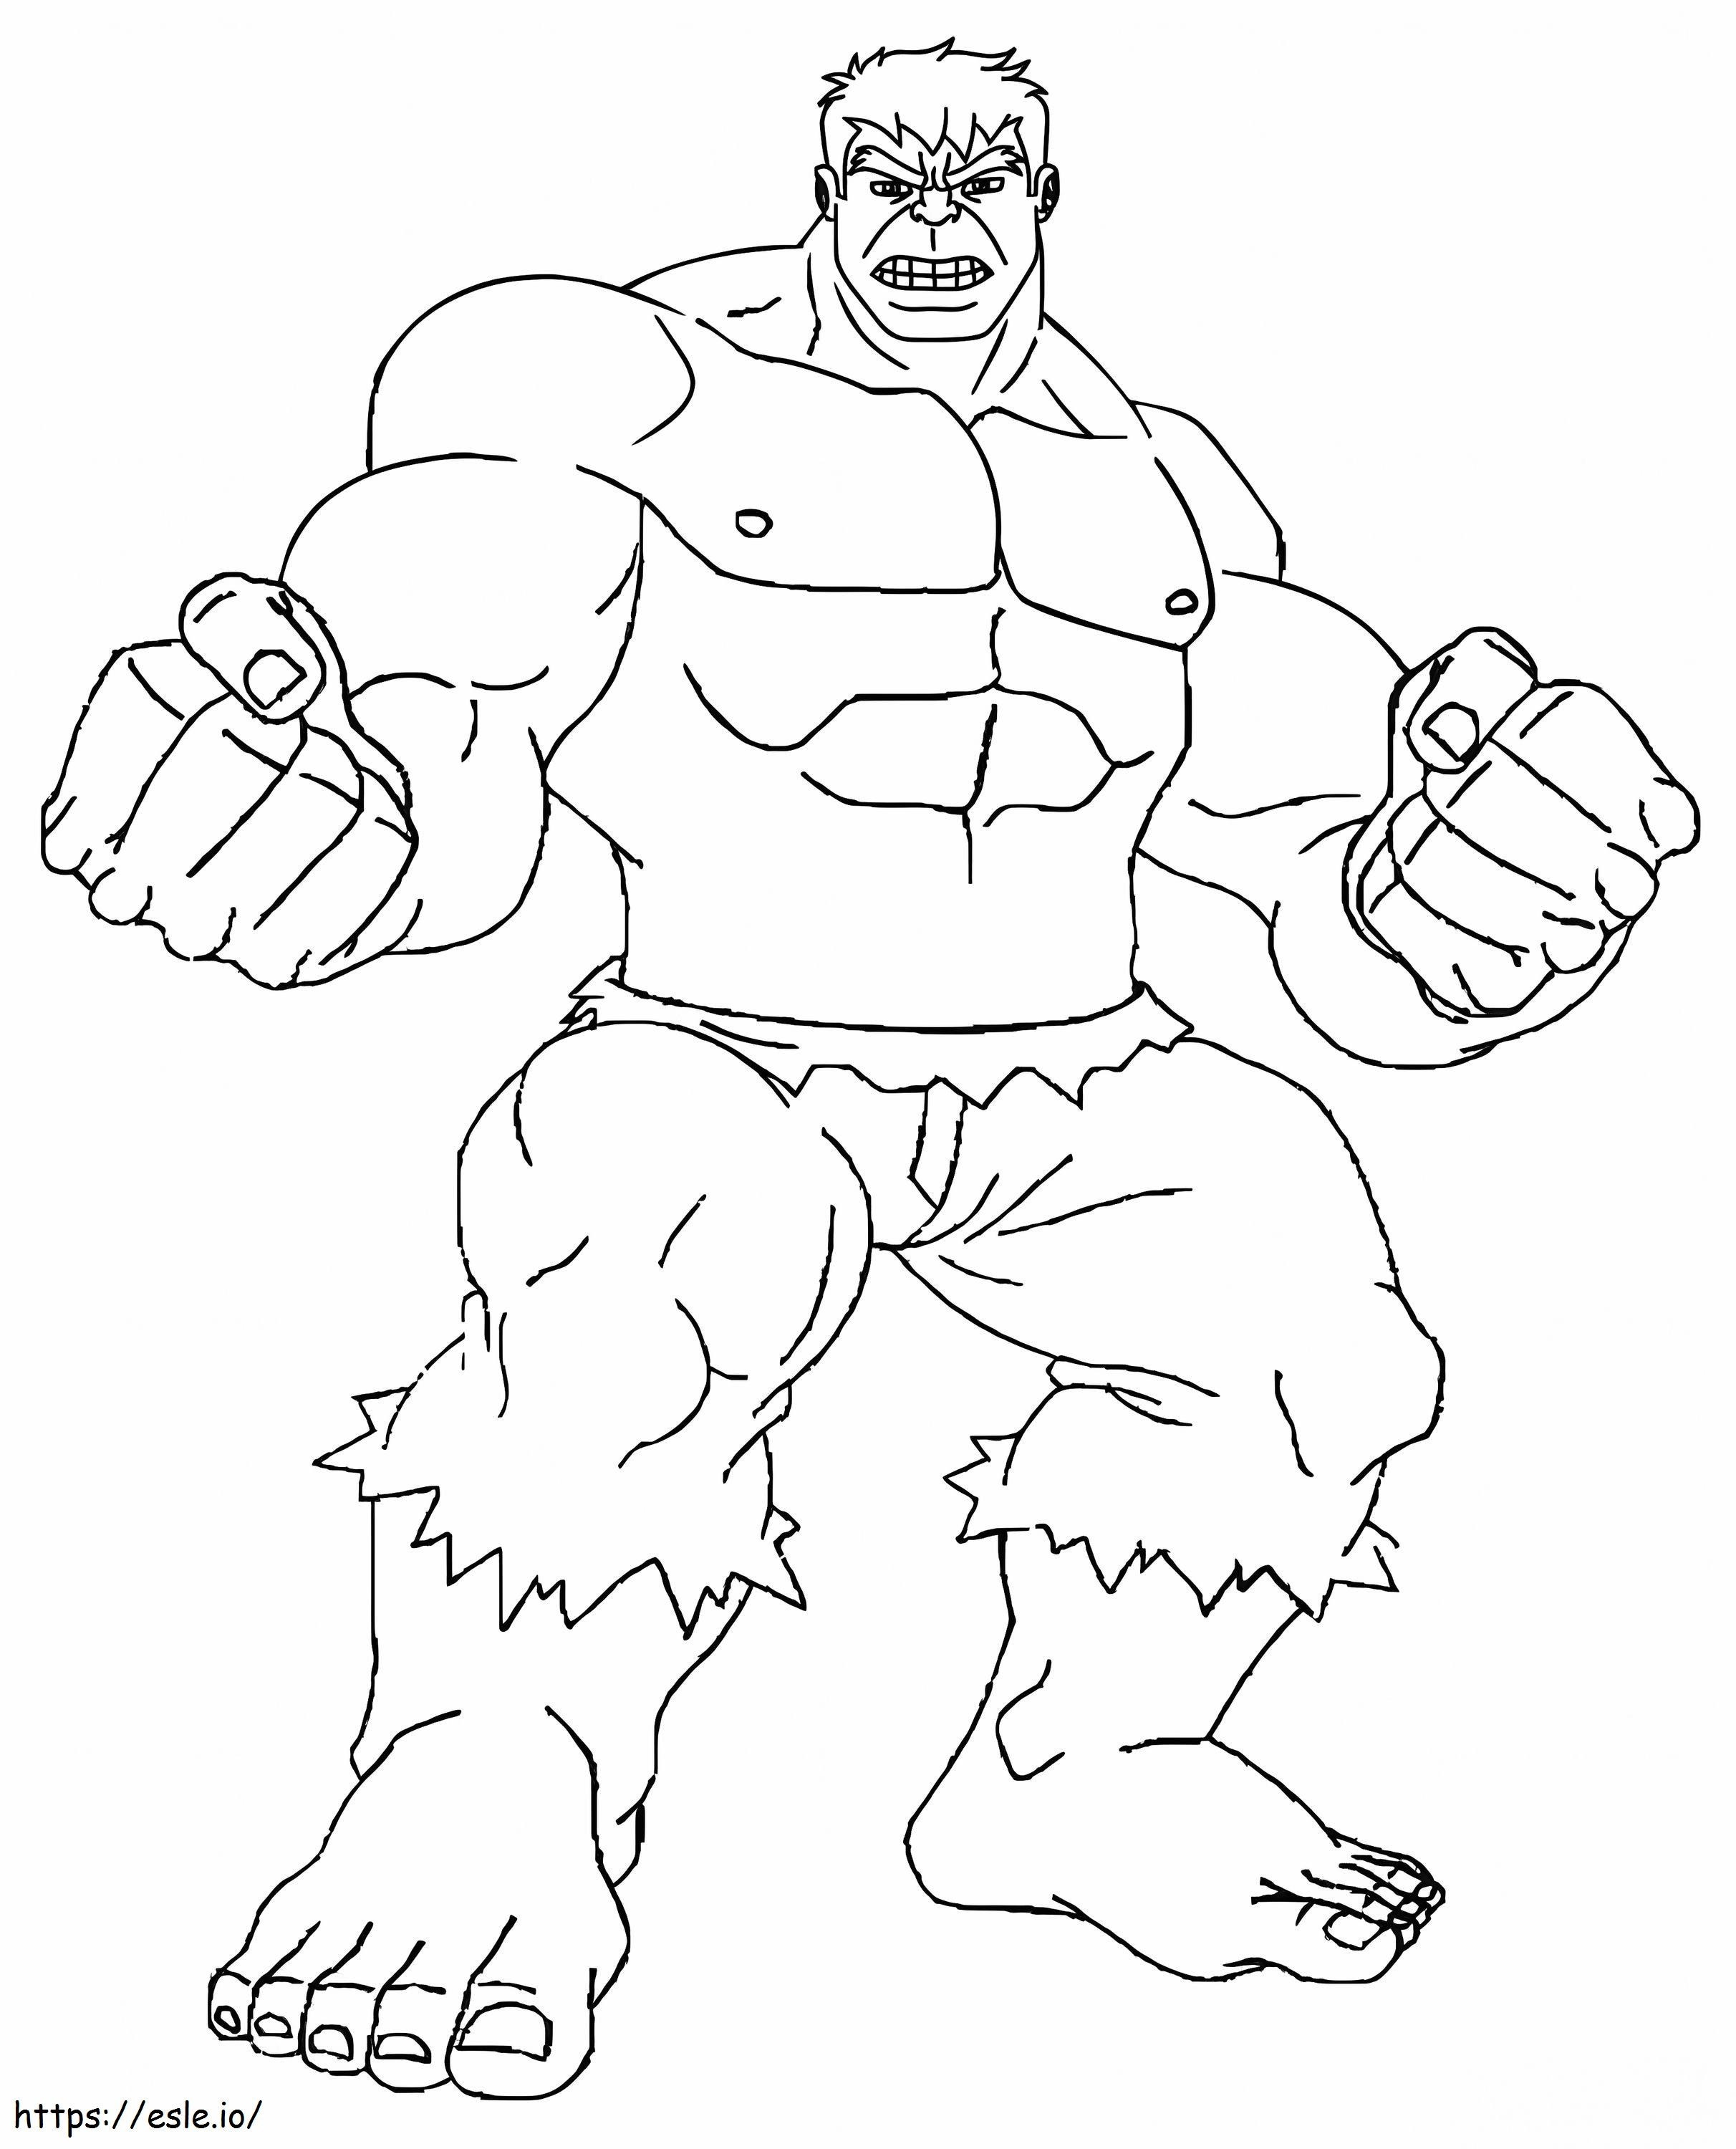 Hulk Is Very Strong coloring page